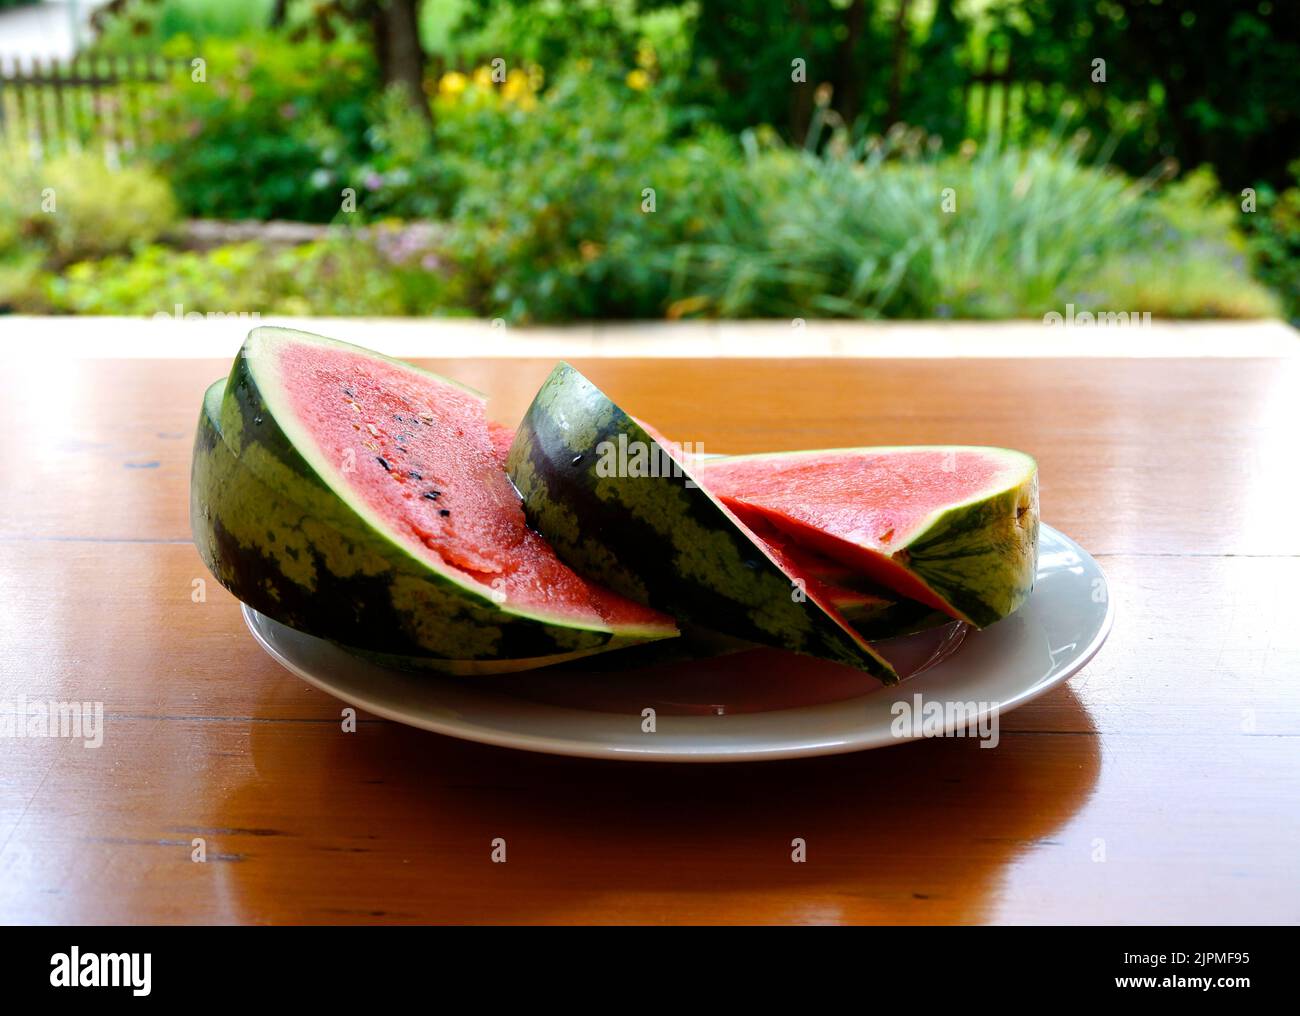 juicy bright red slices of watermelon on the plate on the table in the garden Stock Photo